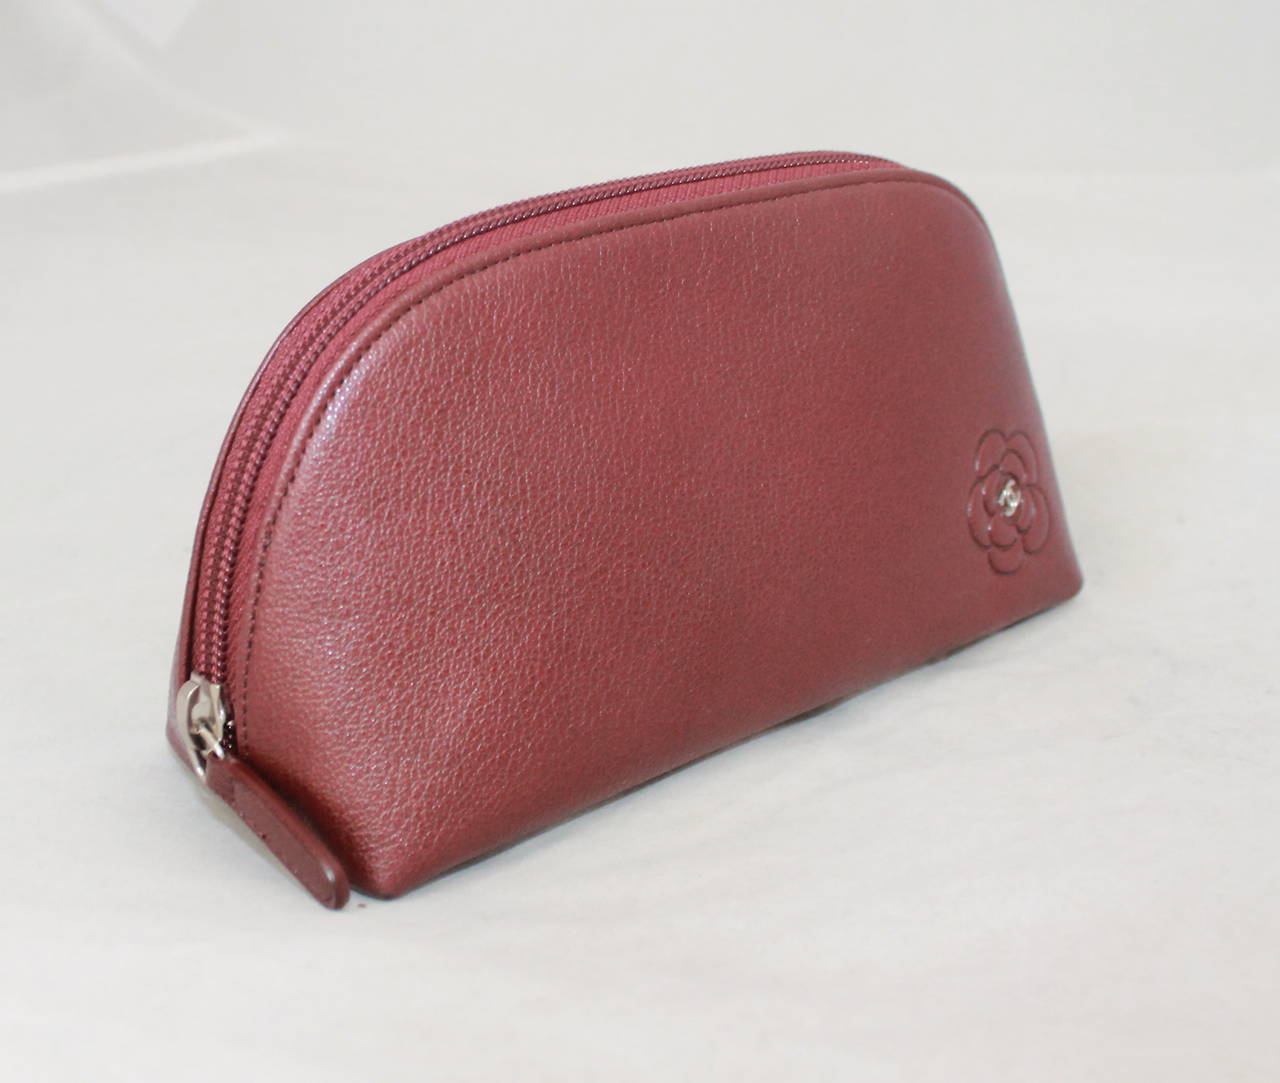 Chanel 2010 Burgundy Leather Make-Up Case with Camelia Motif. This makeup case is in excellent condition with nearly no signs of use.

Measurements:
Length- 4